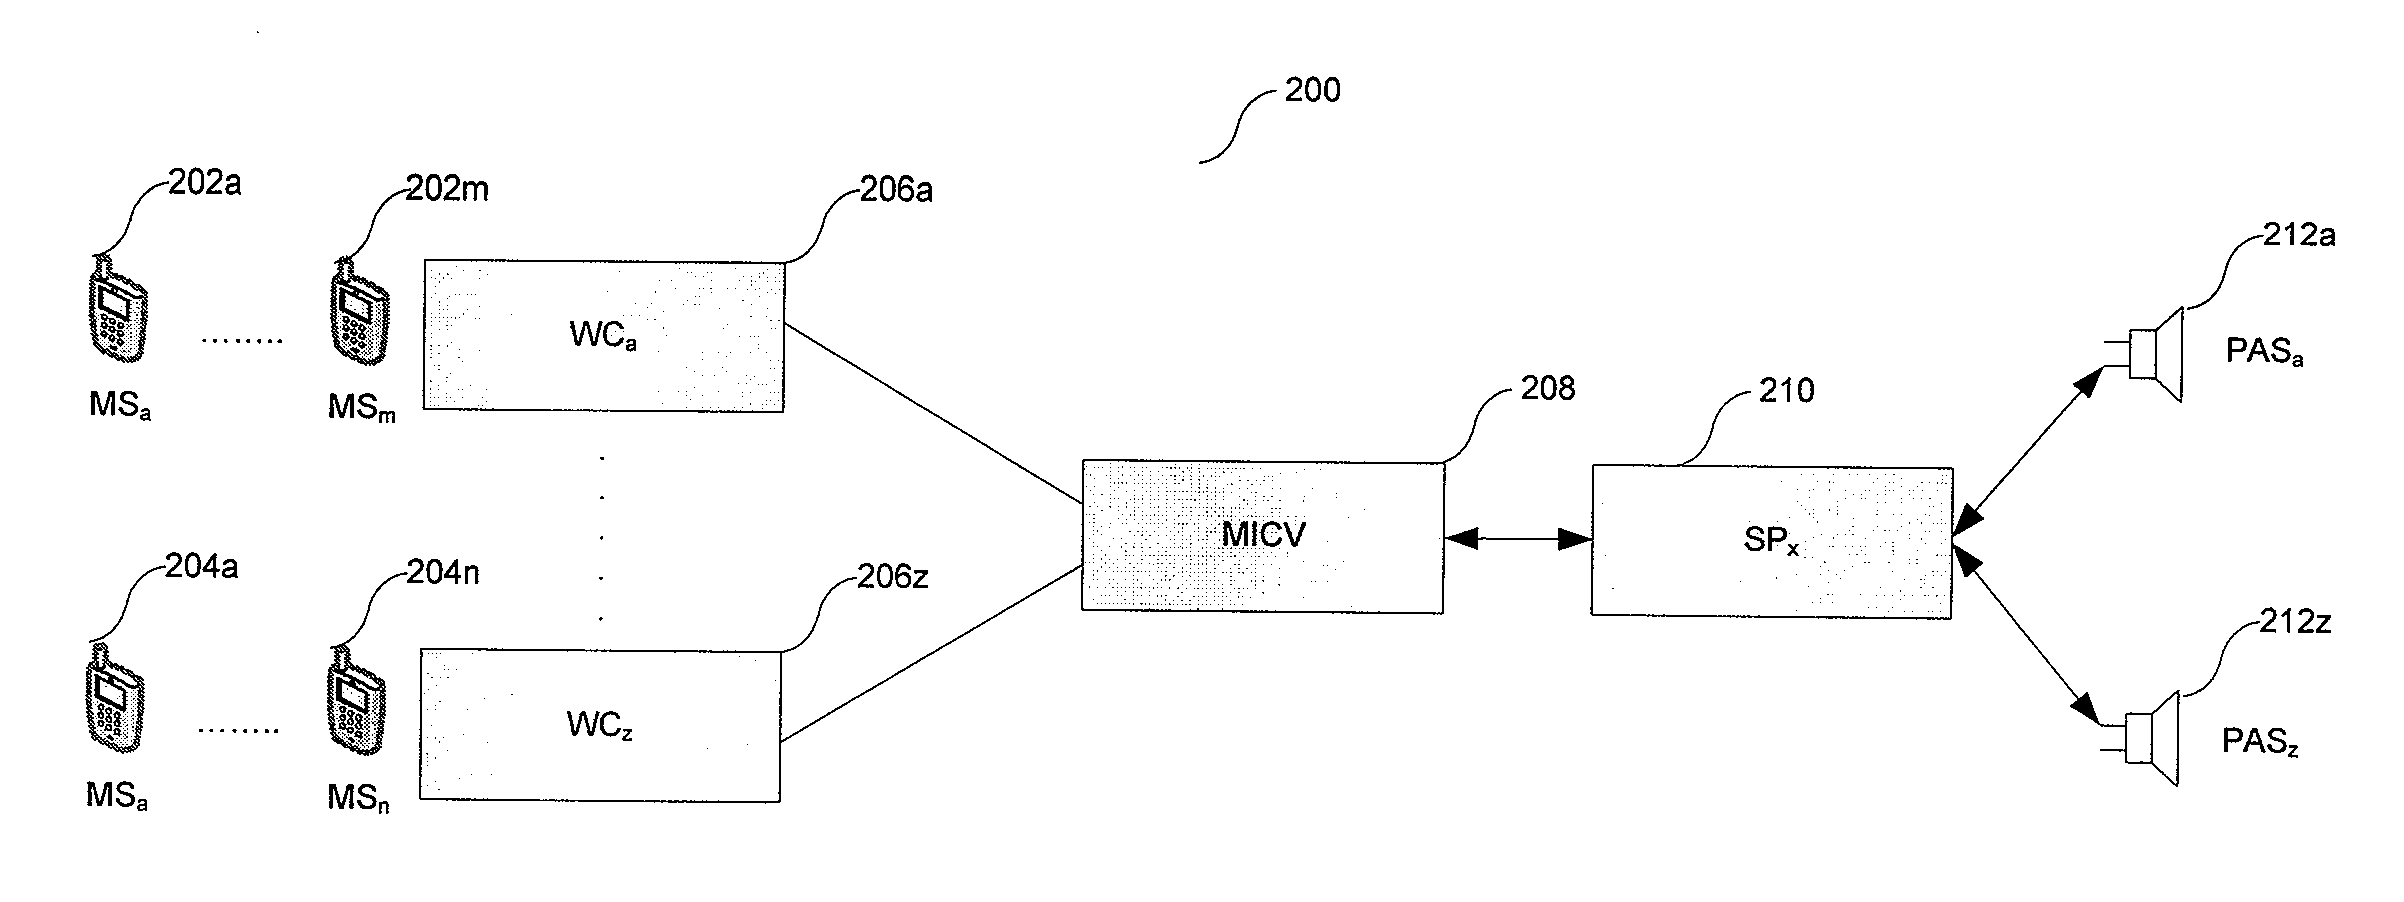 System and Method for Enhanced Public Address System